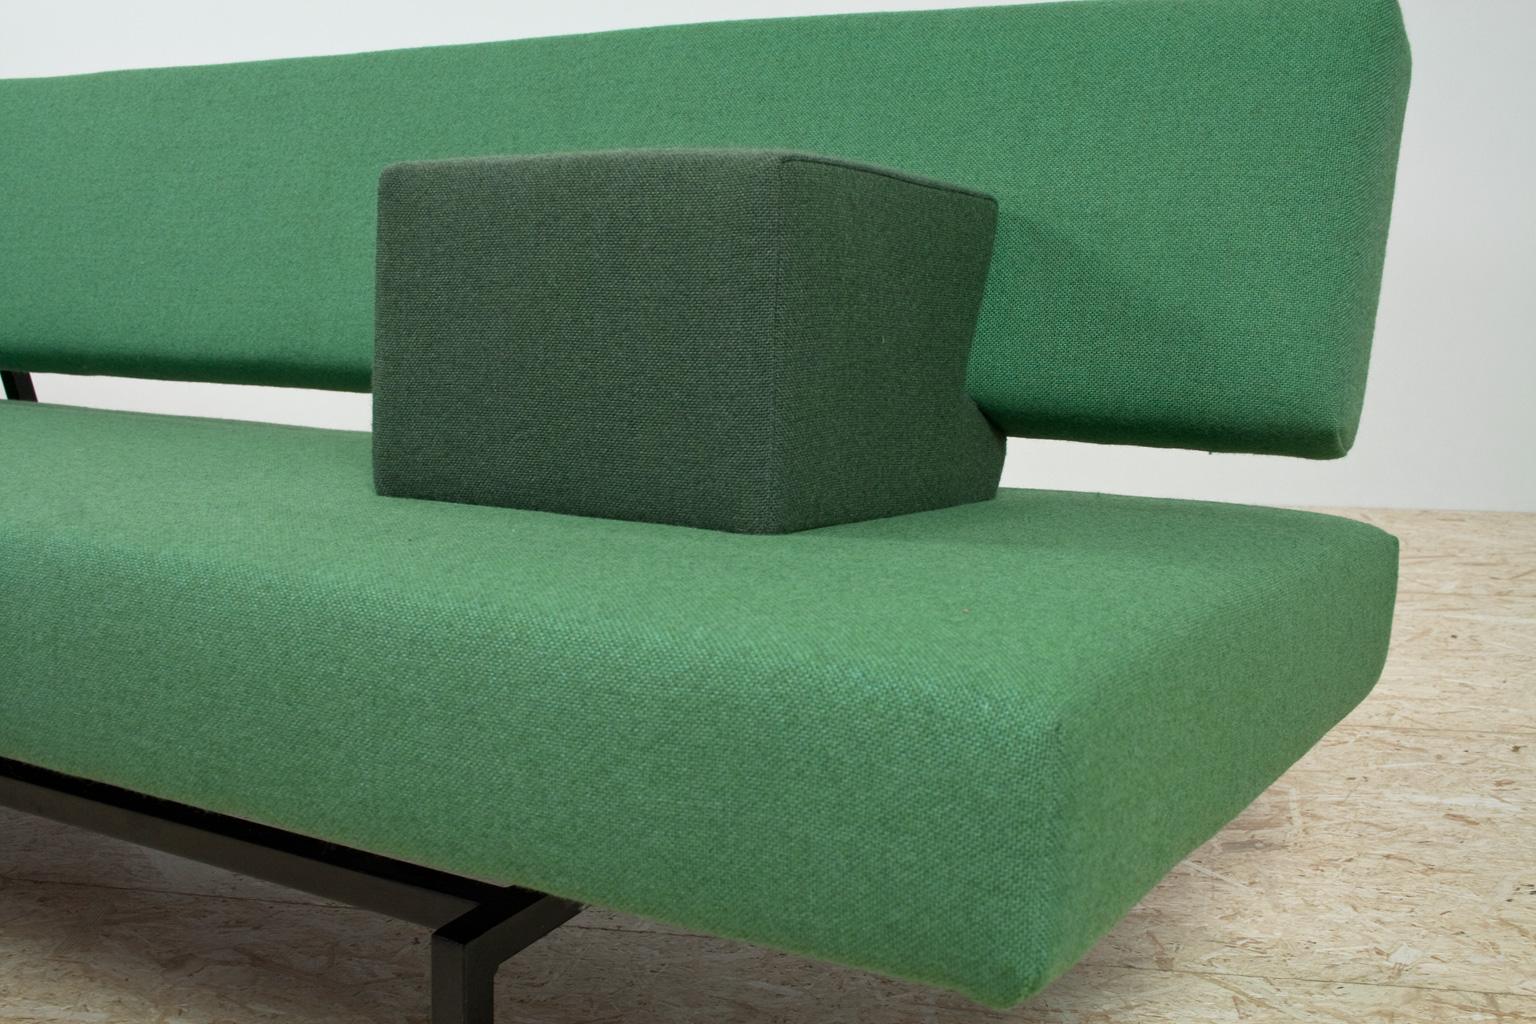 Lacquered Mid-Century Modern Sofa Daybed in Forest Green by Martin Visser, Spectrum, 1960s